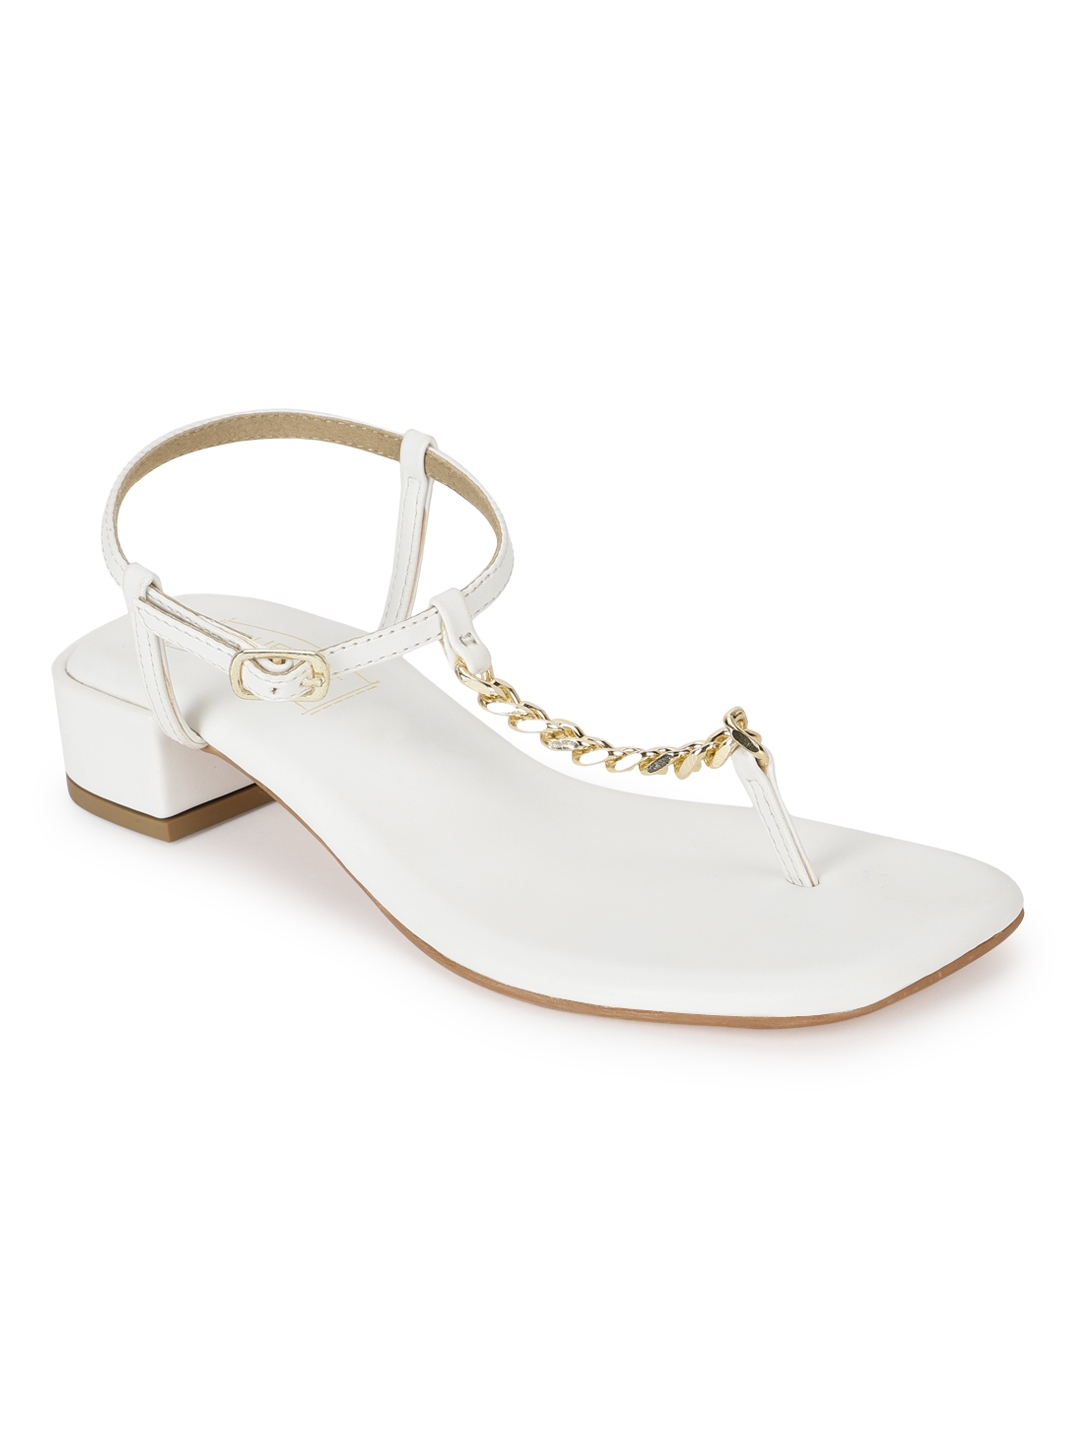 Truffle Collection | White PU Low Block Heel Sandals With Gold Chain